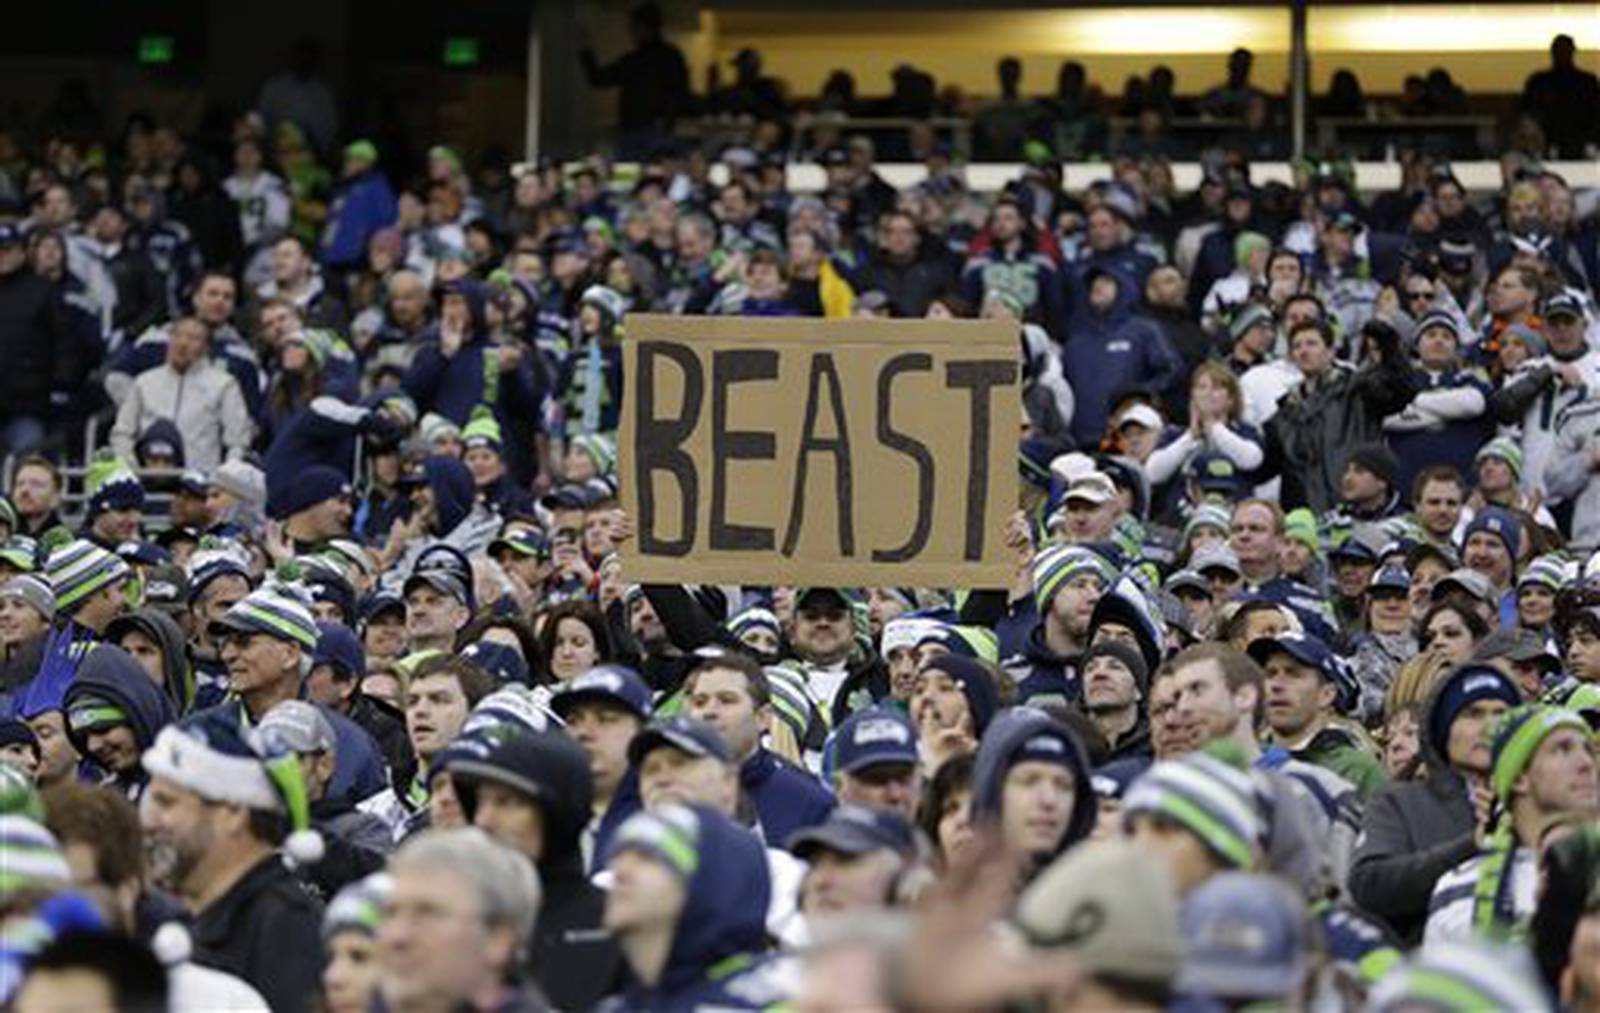 Scientists prepare to monitor 'beast quake' at Seahawks game – KIRO 7 News Seattle